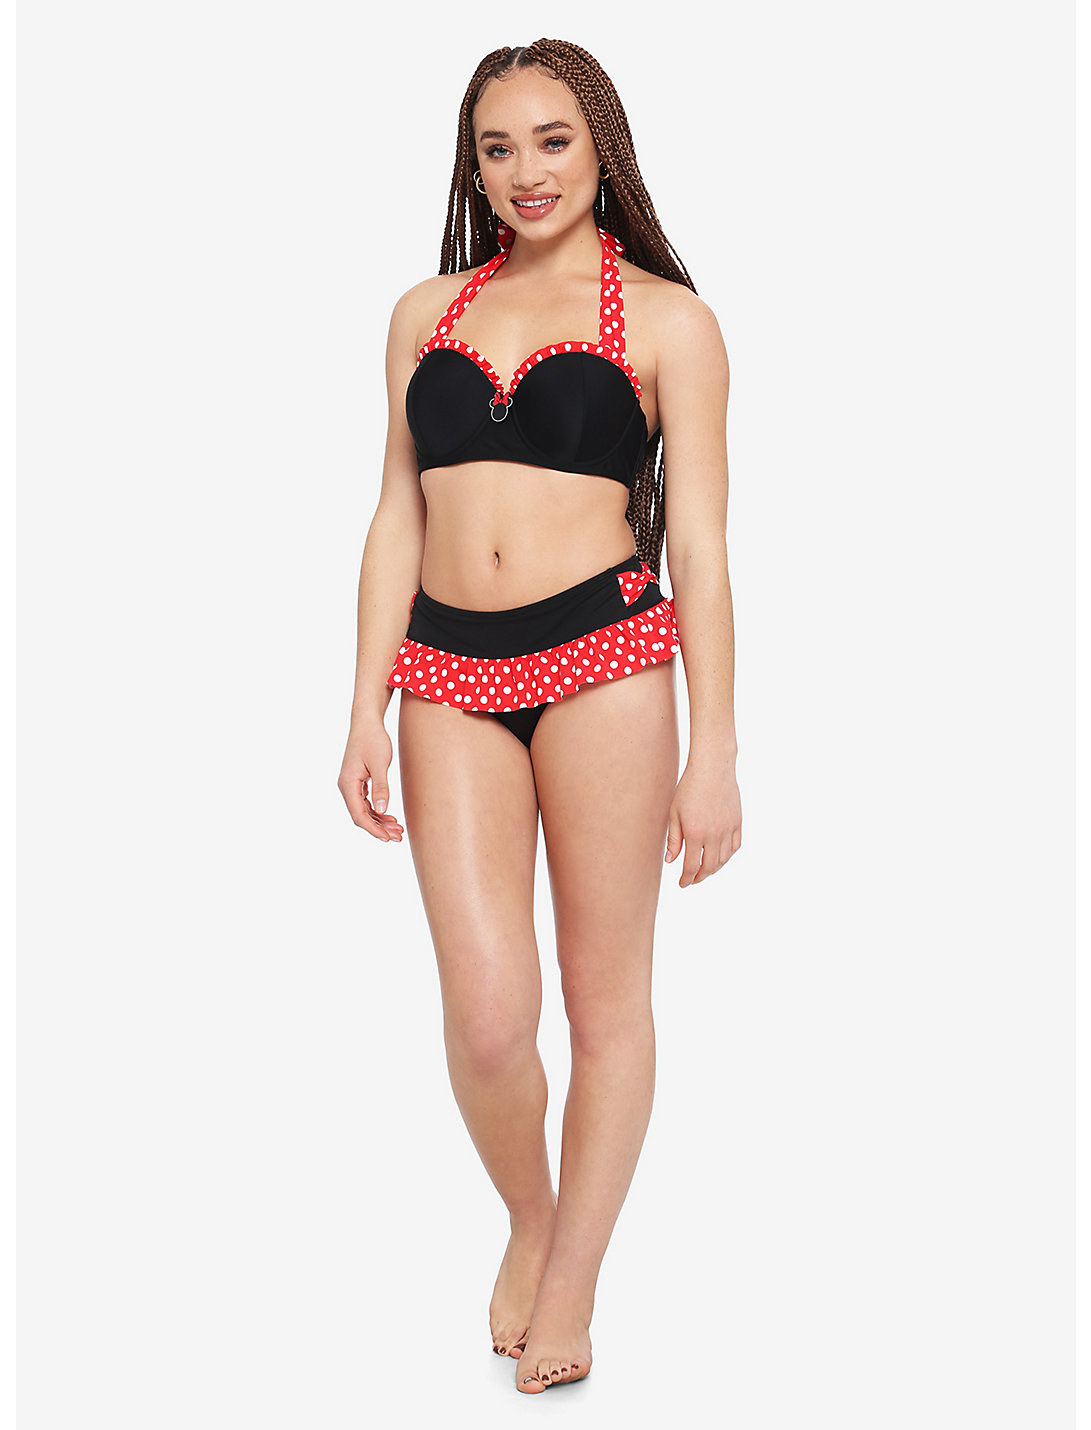 model wearing a black and red two piece with red polka-dotted trim on on the top and straps and on the ruffled skirt of the black bikini bottom. Minnie&#x27;s signature